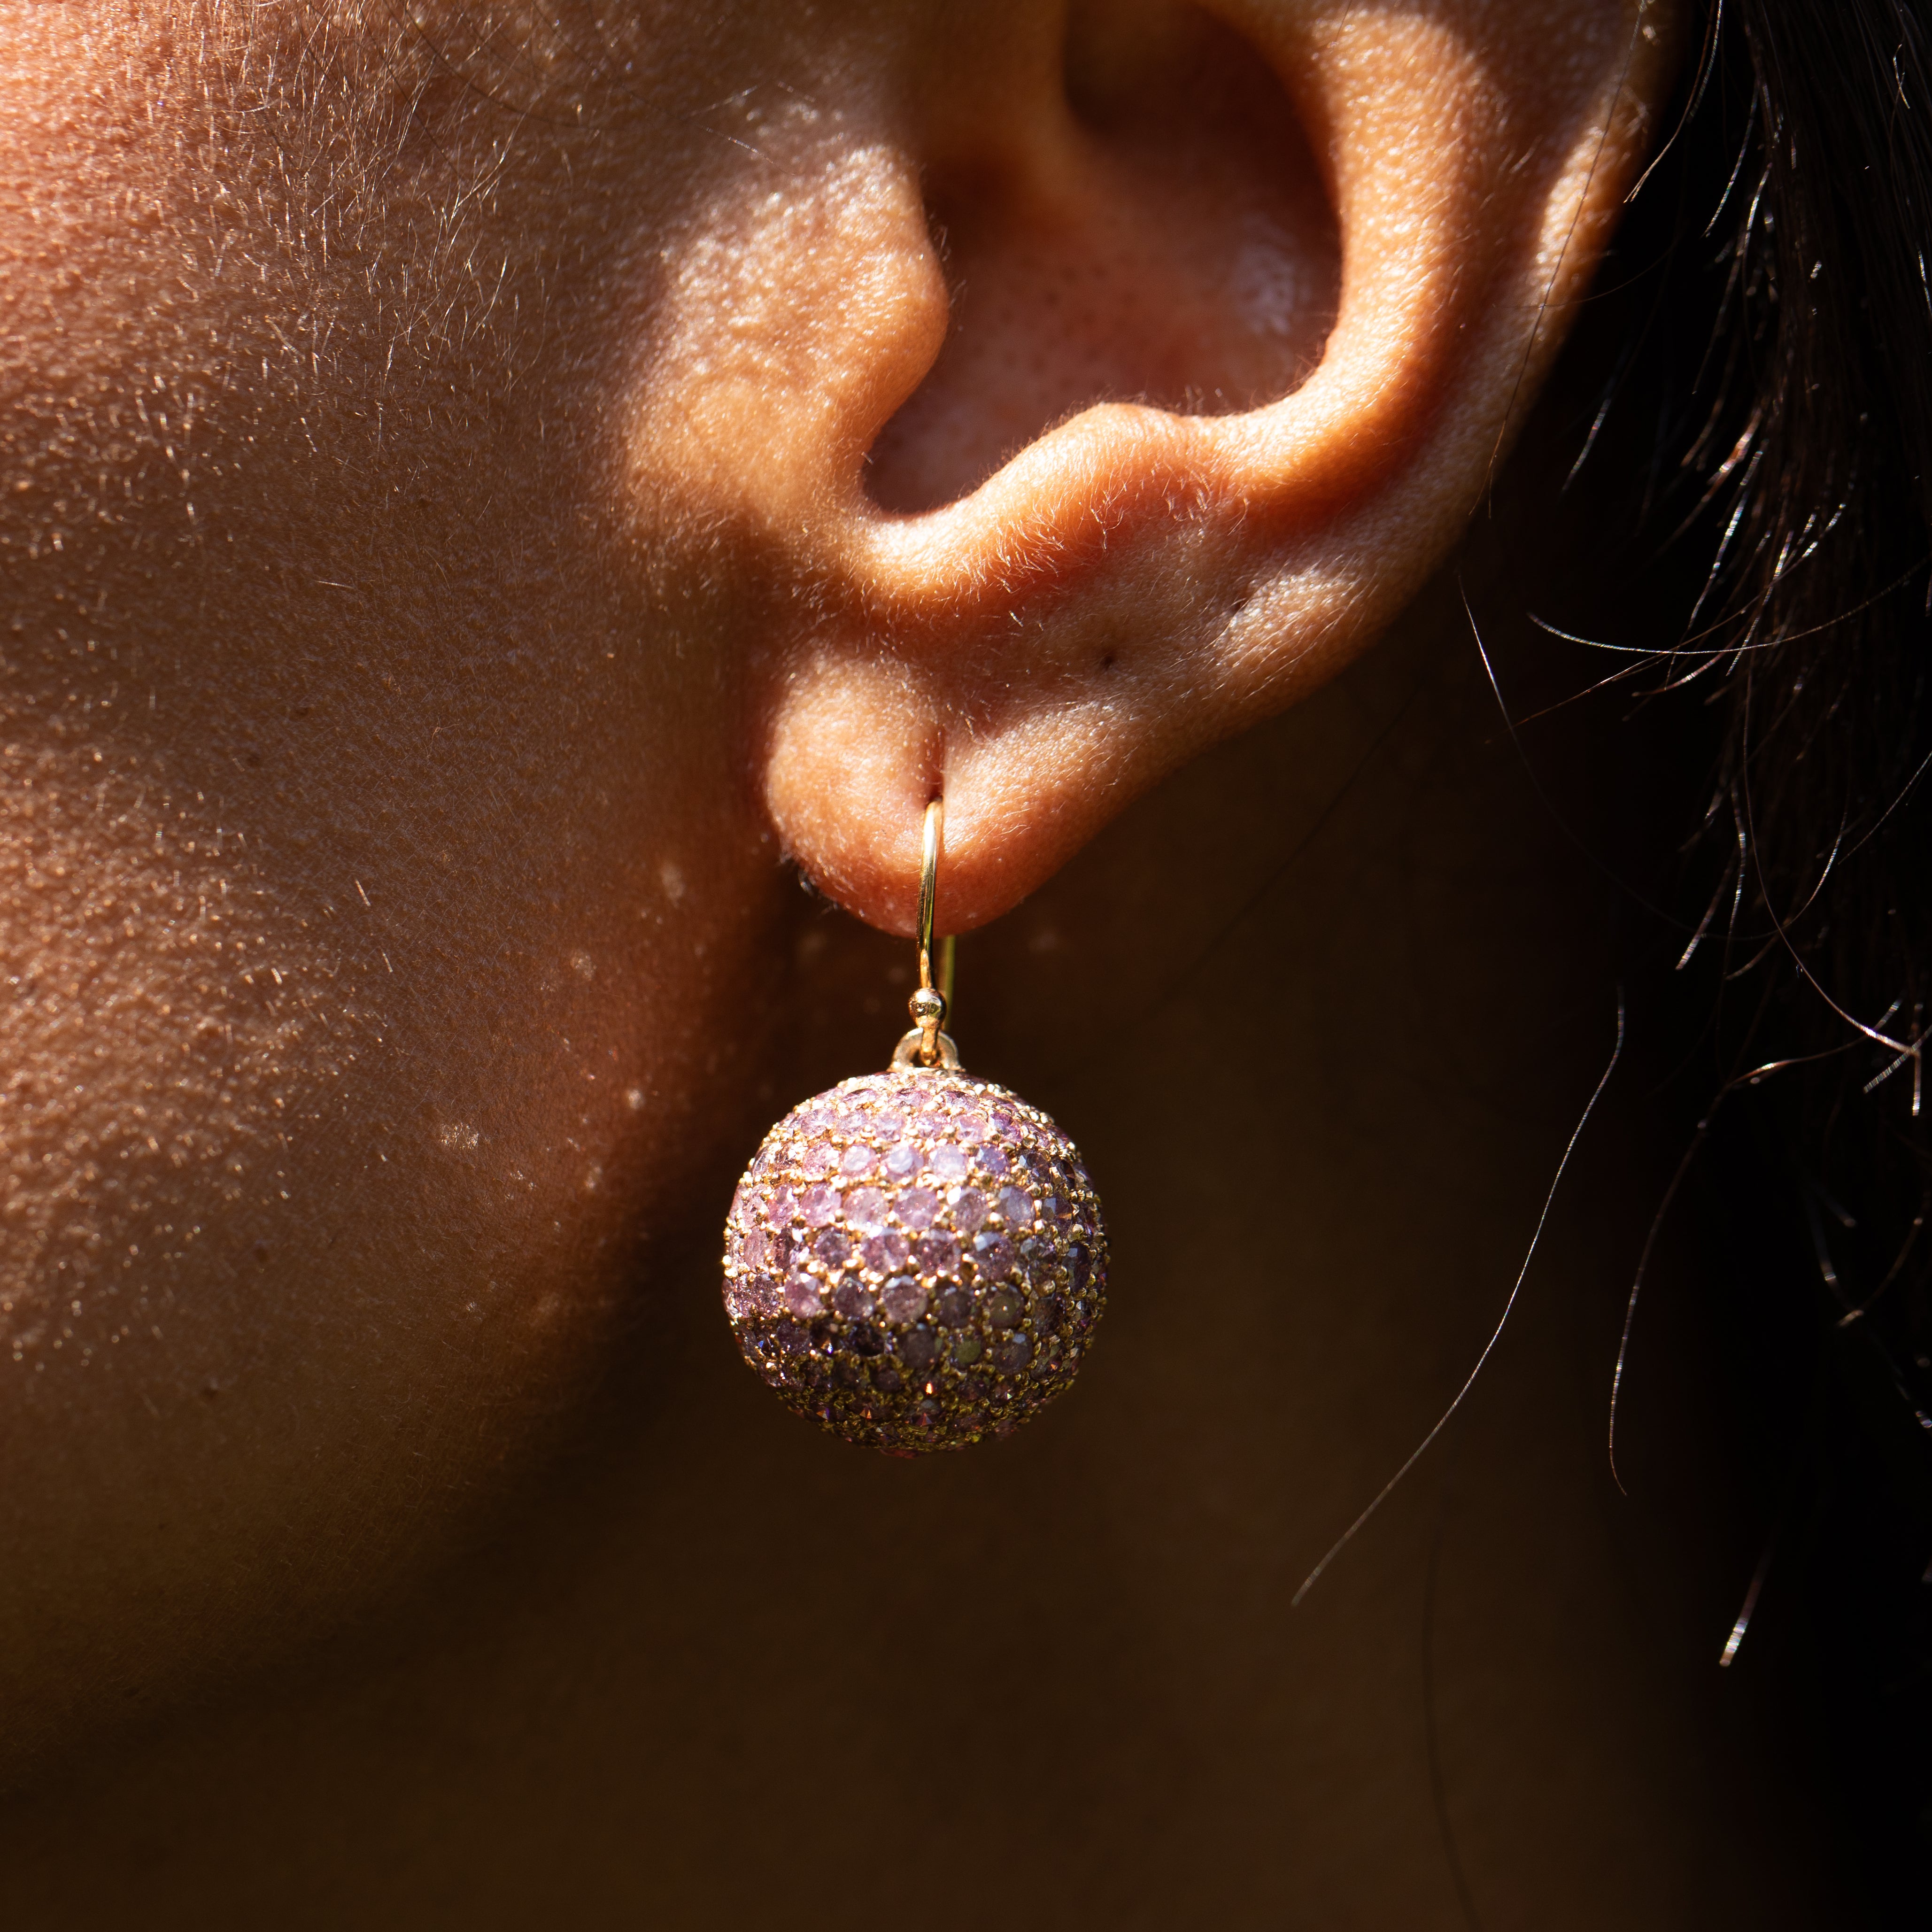 Pink Sapphire and 14K Rose Gold Disco Ball Earrings